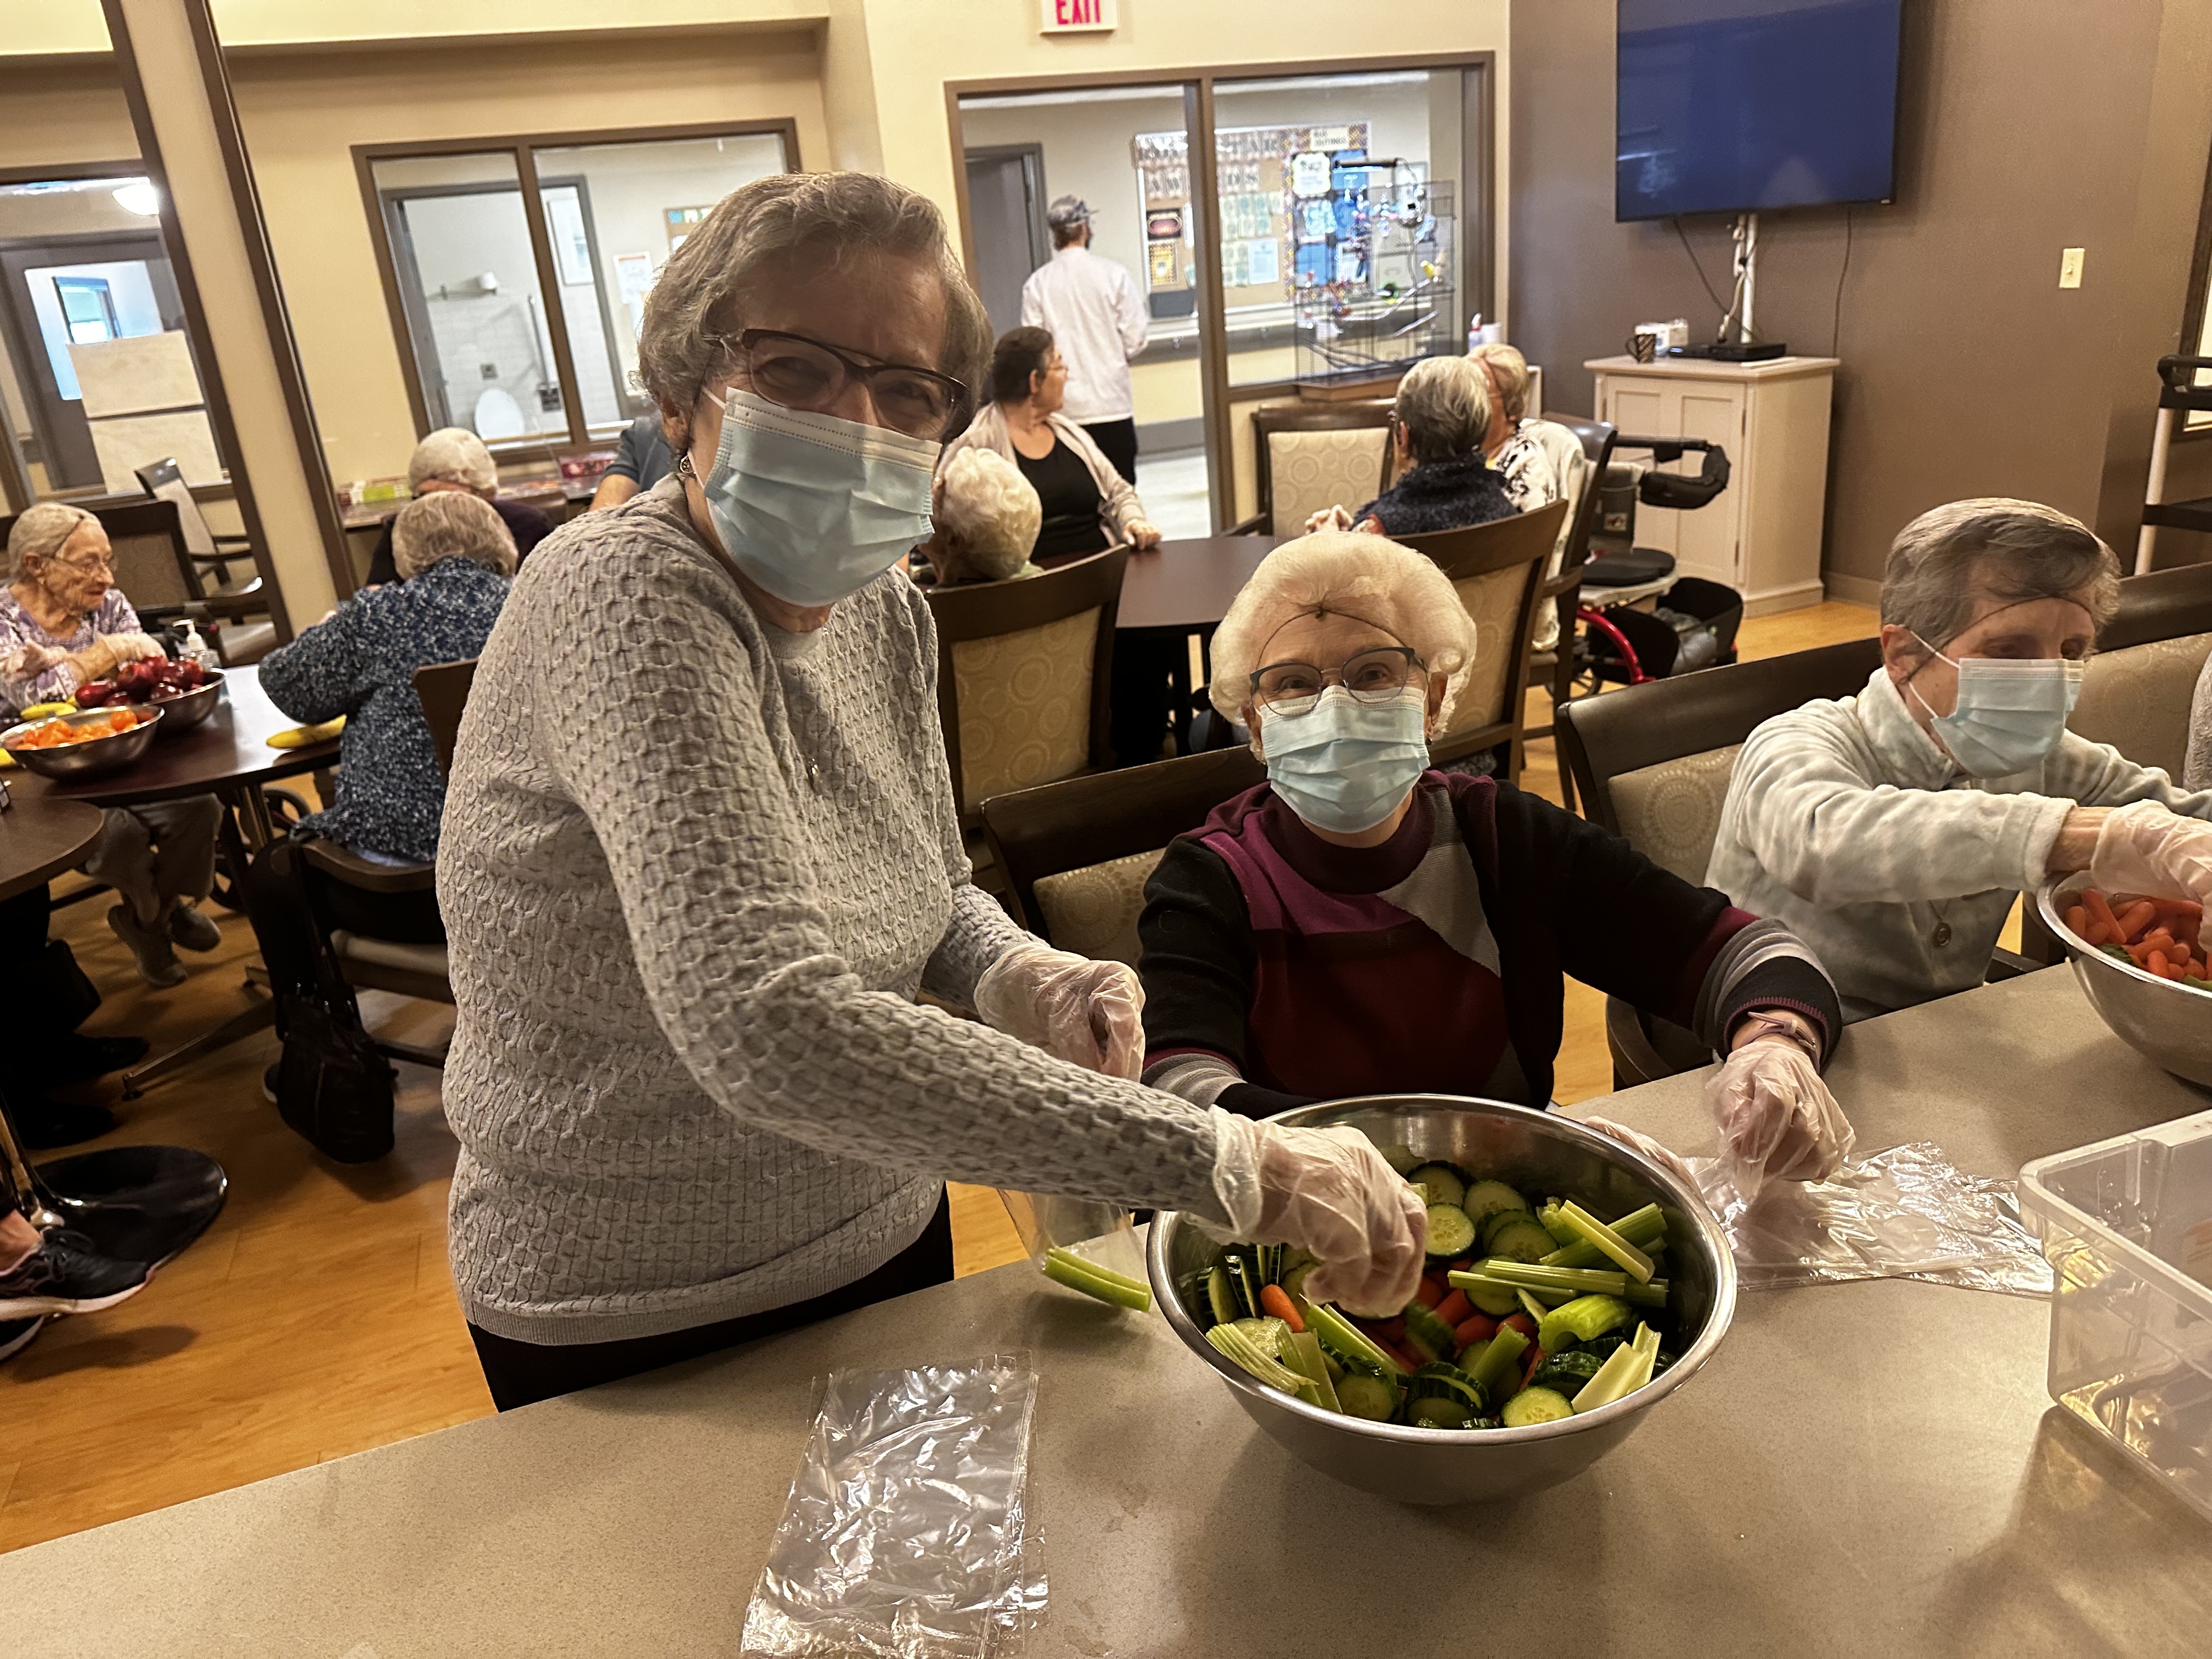 Three residents at a Covenant site mix veggies in a bowl.